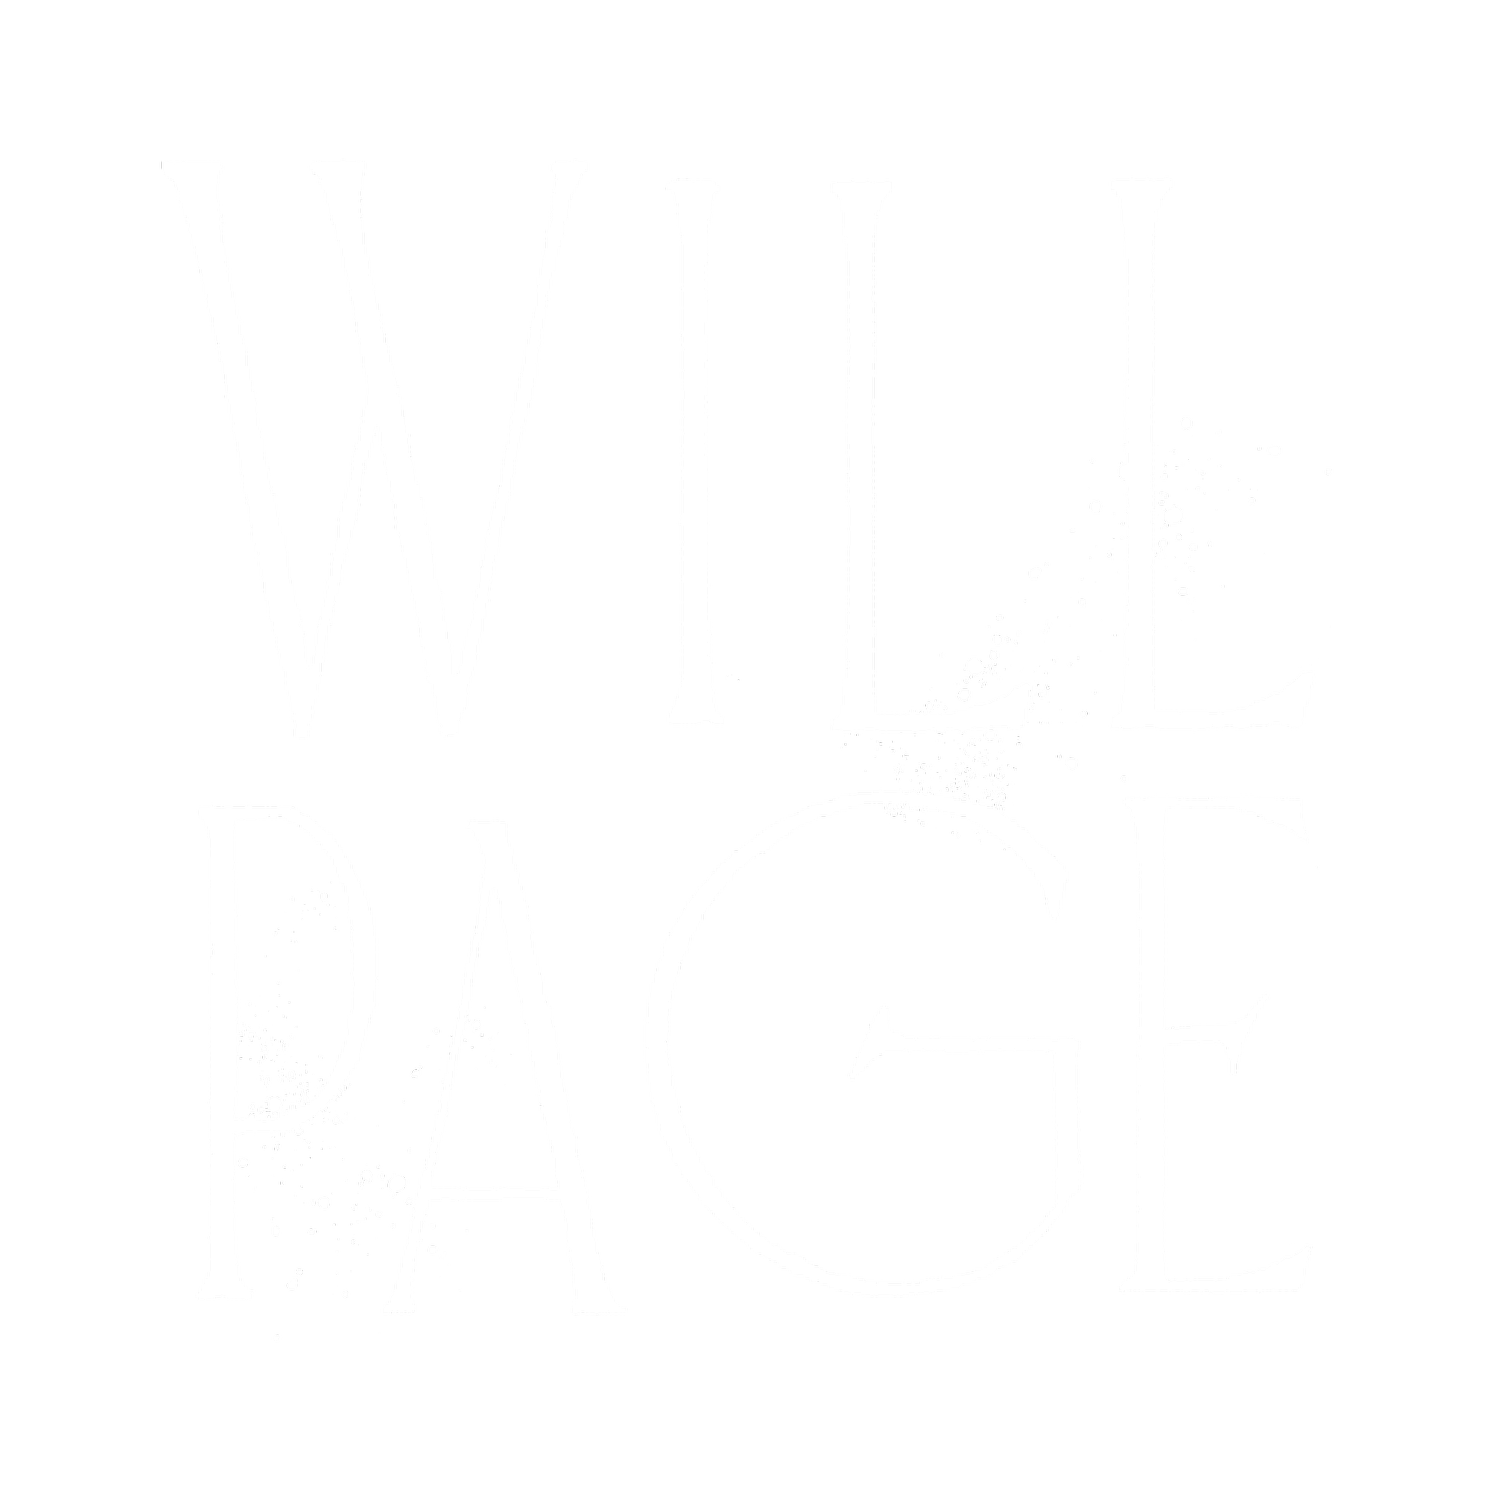 Will Page